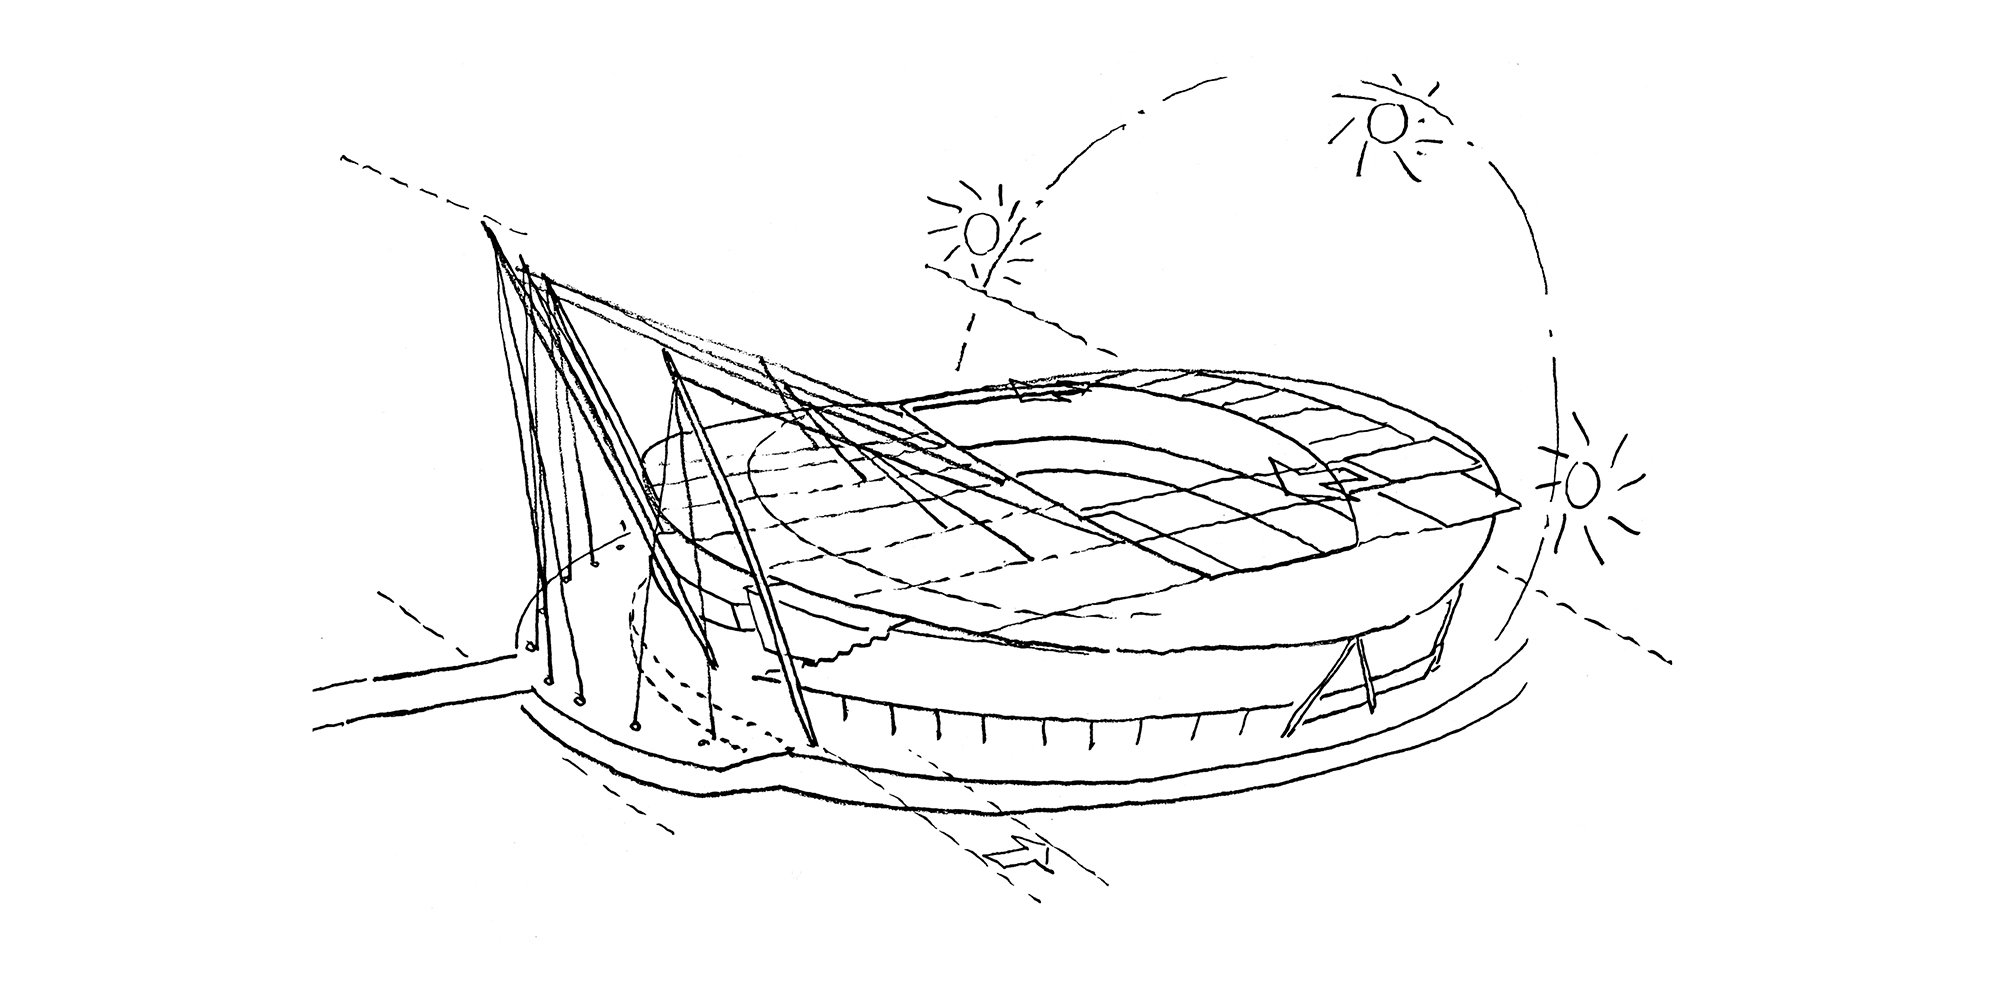 Concept sketch by Norman Foster showing the stadium's retractable roof, which maximises sunlight on the pitch. 